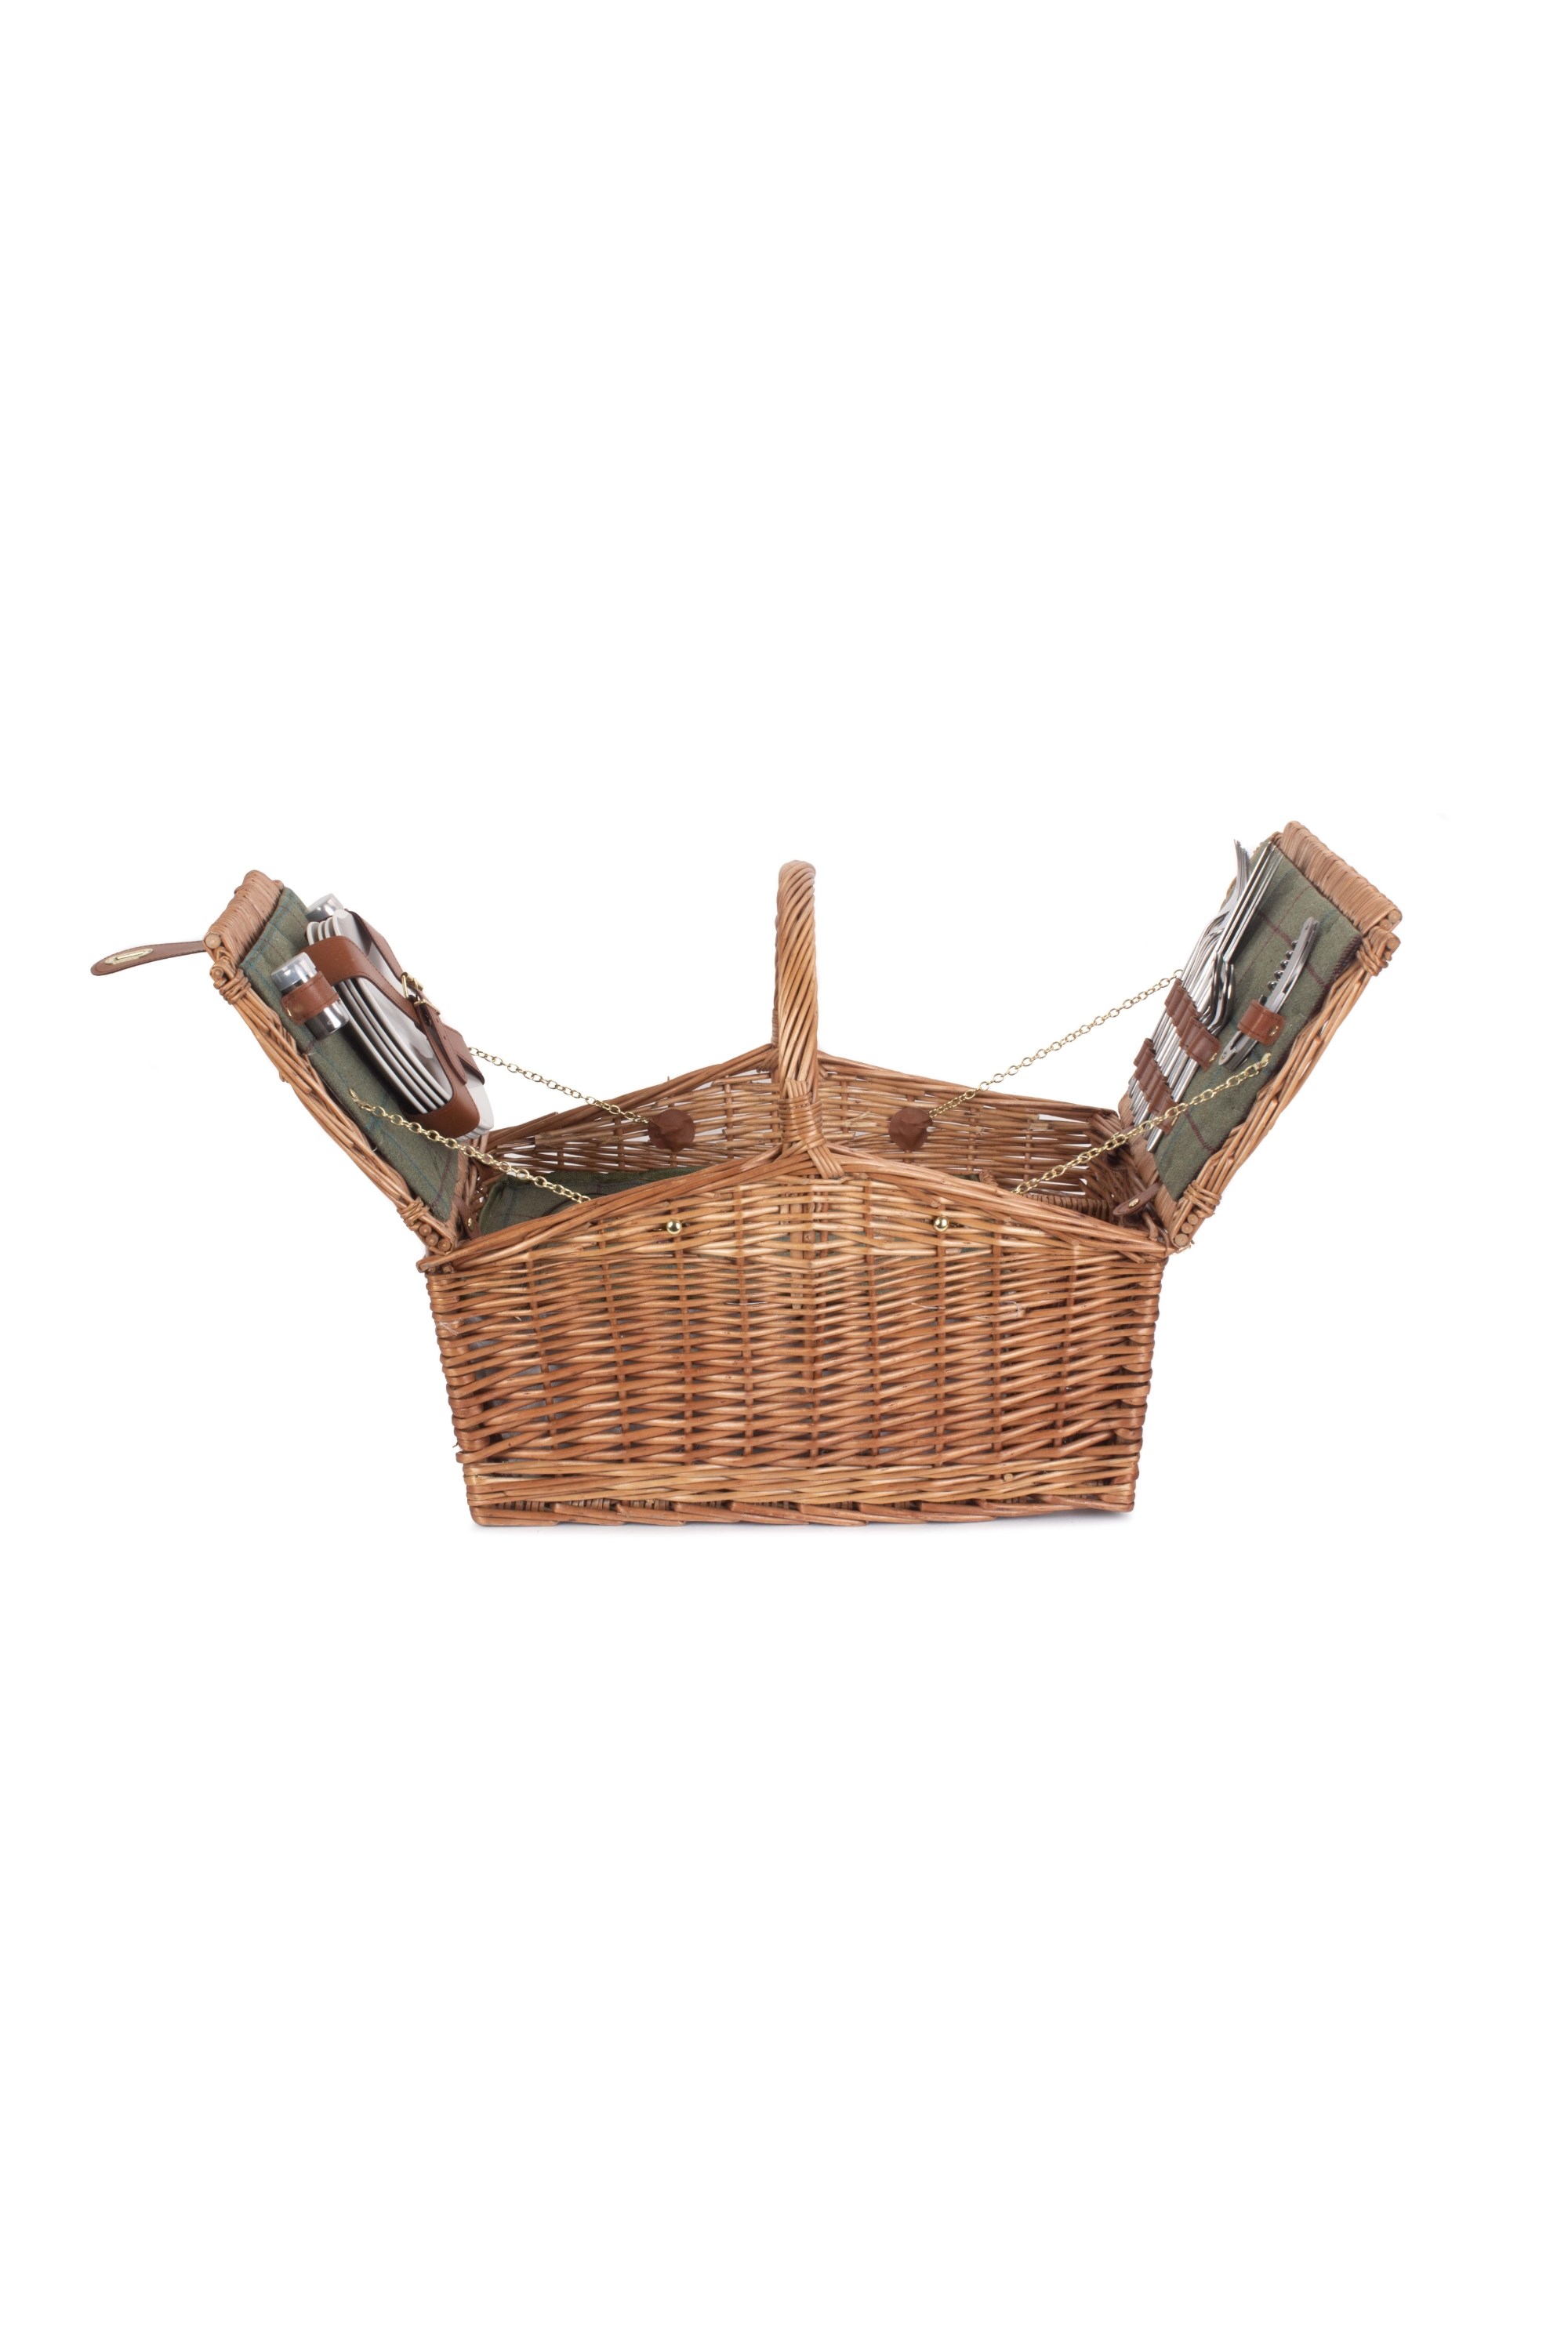 4 Person Double Lidded Green Tweed Picnic Basket -